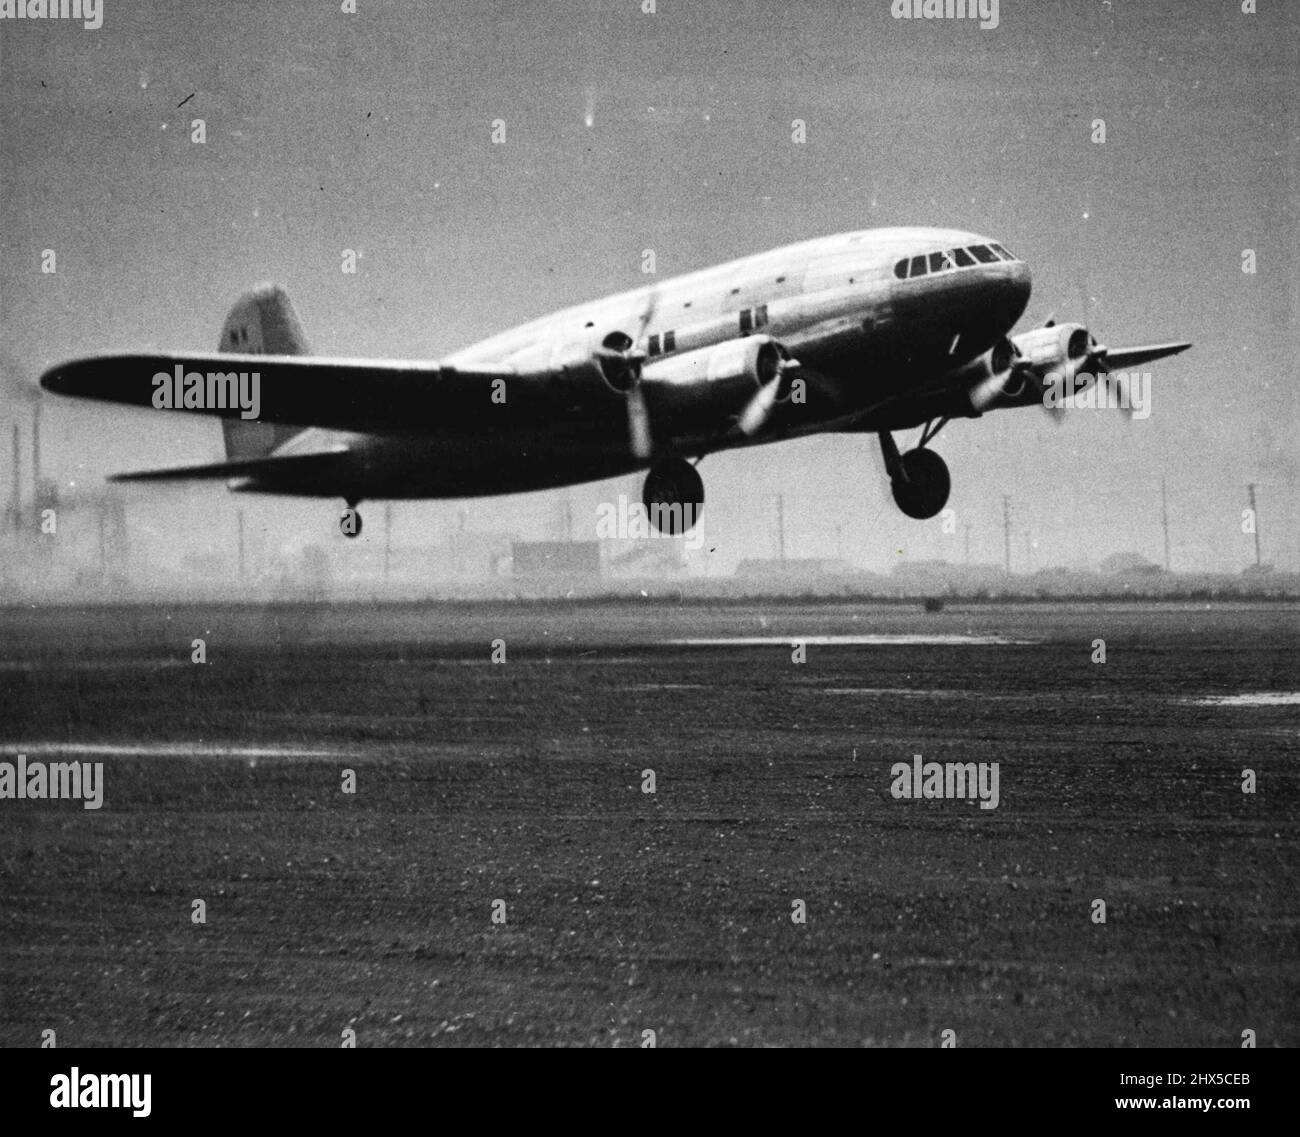 New Boeing Stratsphere Plane Receives Tests - Test pilot Edmund T. Allen takes the new Boeing stratoliner into the air for the first time during a series of short mops about the field here. These tests are preliminaries before the regular test flights and are designed to check the instruments and controls. January 2, 1939. (Photo by Wide World Photo). Stock Photo